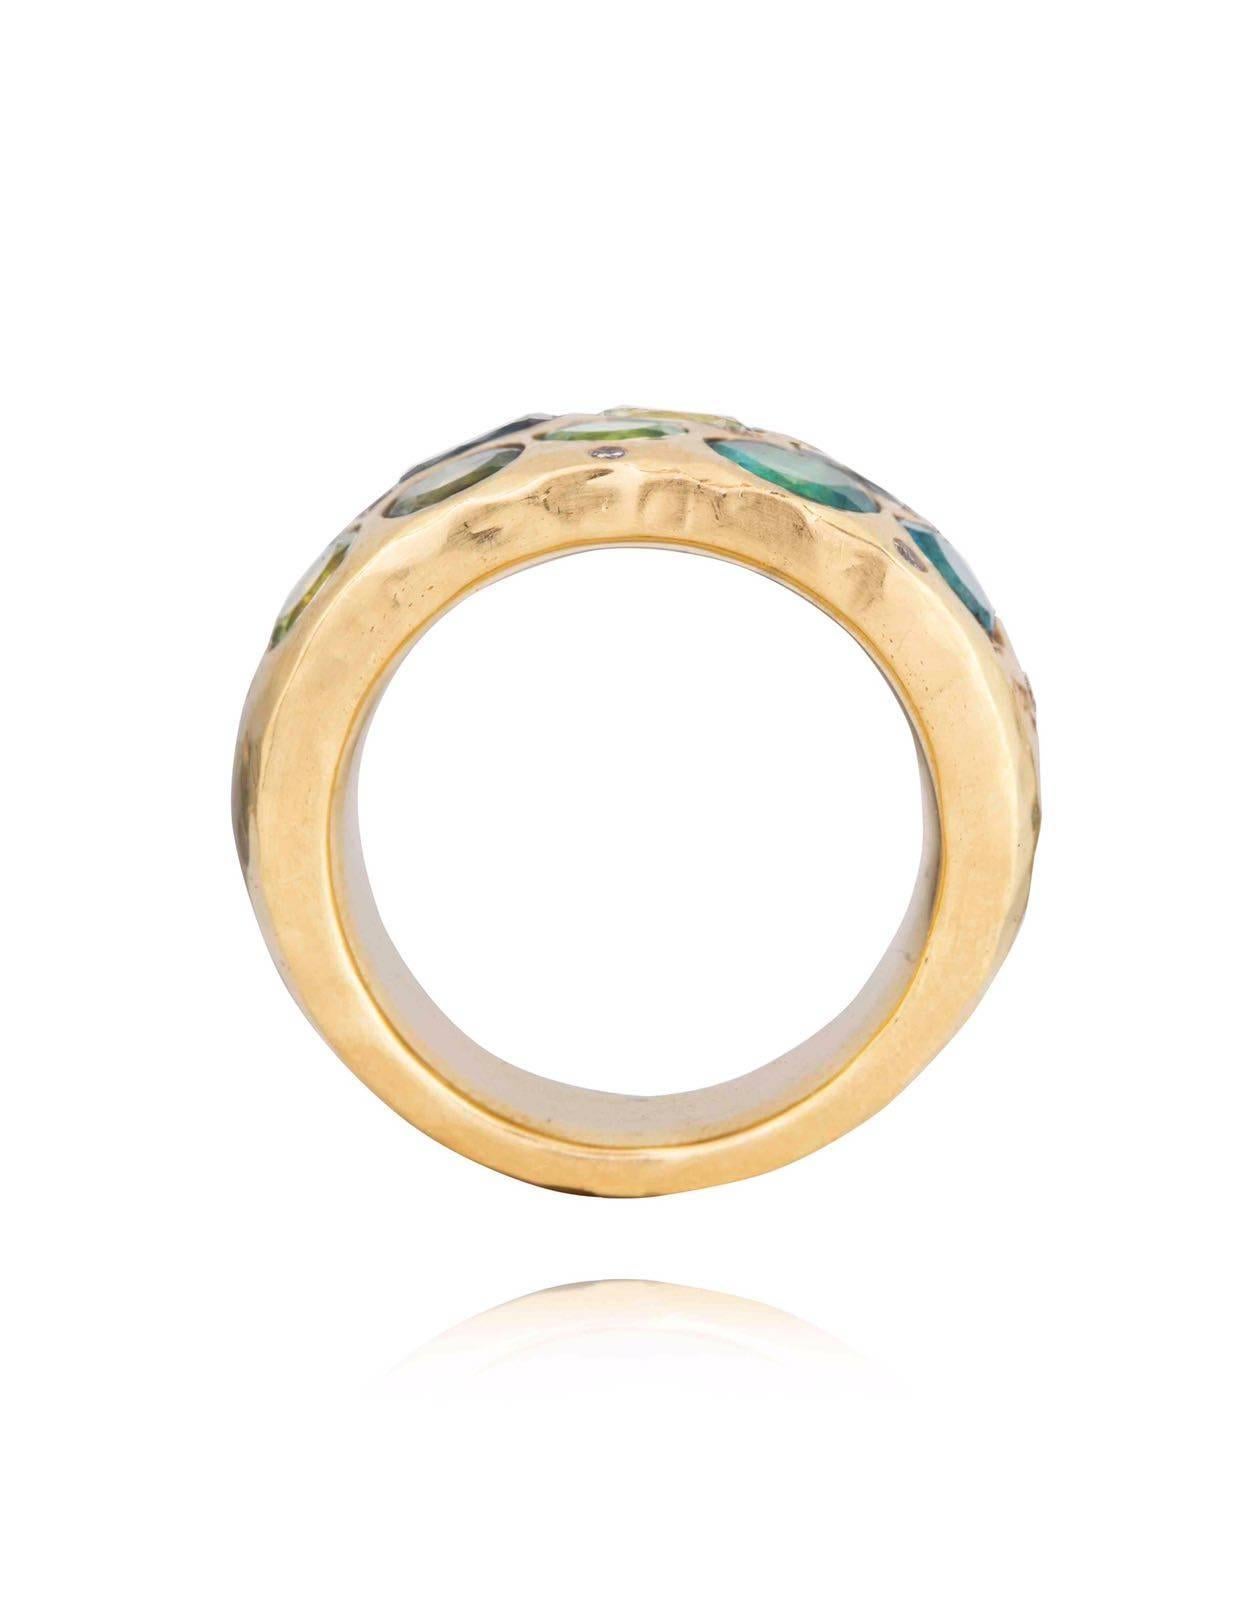 Blue and Green Tourmaline and Diamond 18 Karat Gold Ring. 

The Indian Ocean ring is handmade with a hand beaten gold finish. The ring is solid gold and has a feeling of weight to it. 

Size USA 8 / EUR 58 in stock. 

Other ring sizes can be ordered